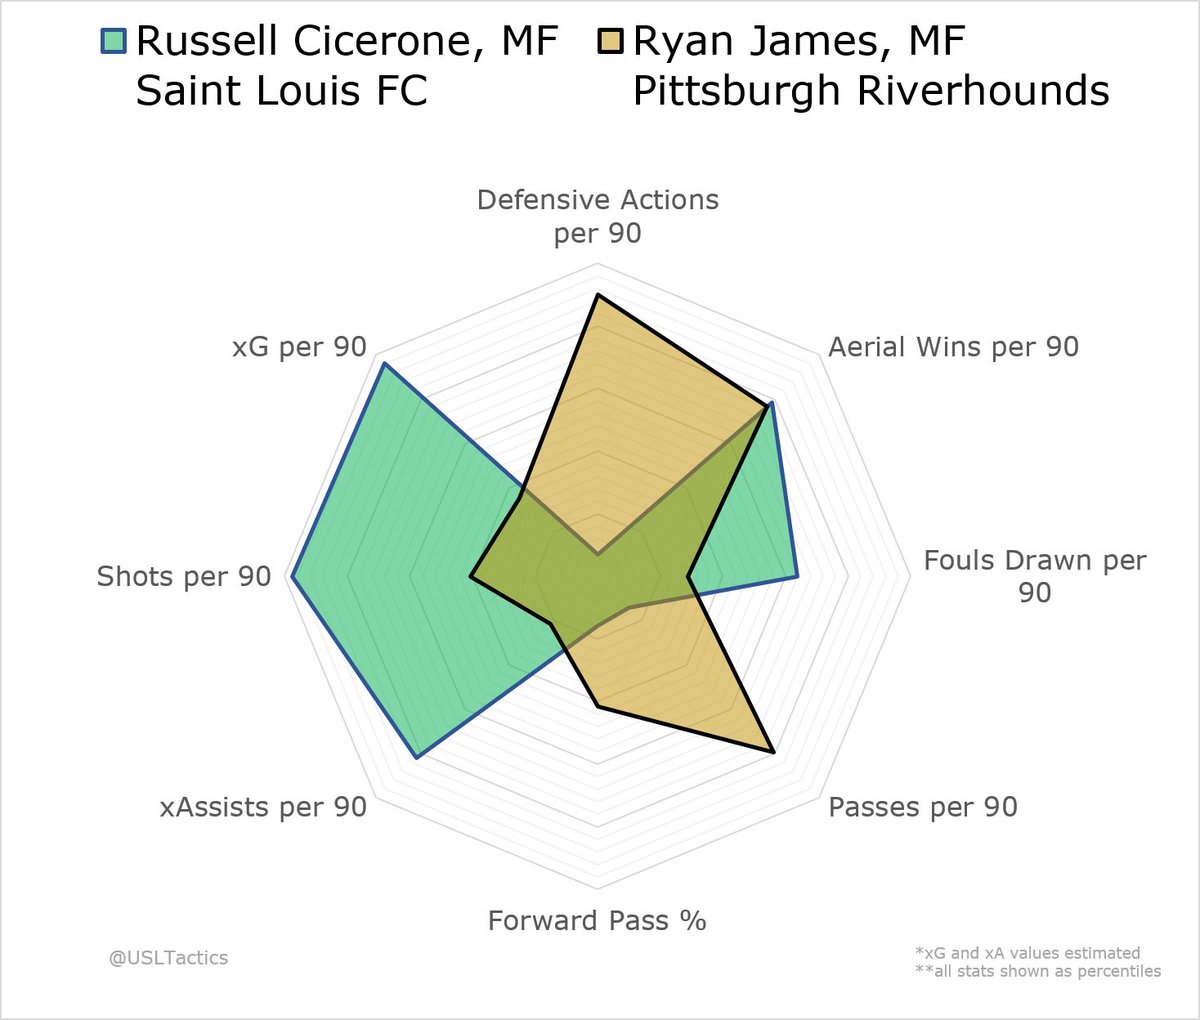 Russell Cicerone figures to replace Ryan James as the LWB, and Pittsburgh fans should be overjoyed. Cicerone may be the best crosser in the USL, and his defensive solidity is numerically belied by the fact that St. Louis often used him in their front three.